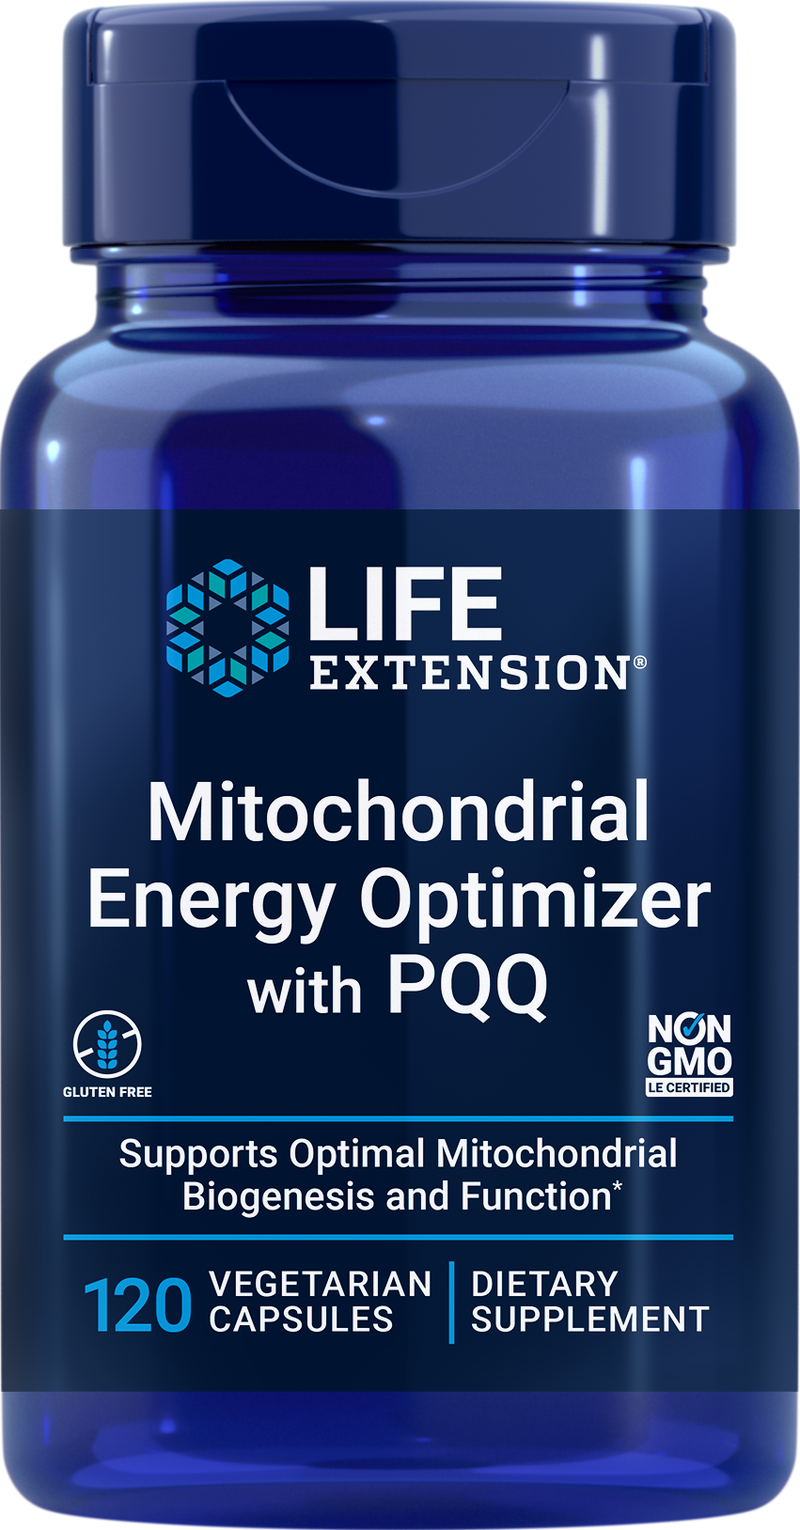 Mitochondrial Energy Optimizer with PQQ 120 veg caps by Life Extension